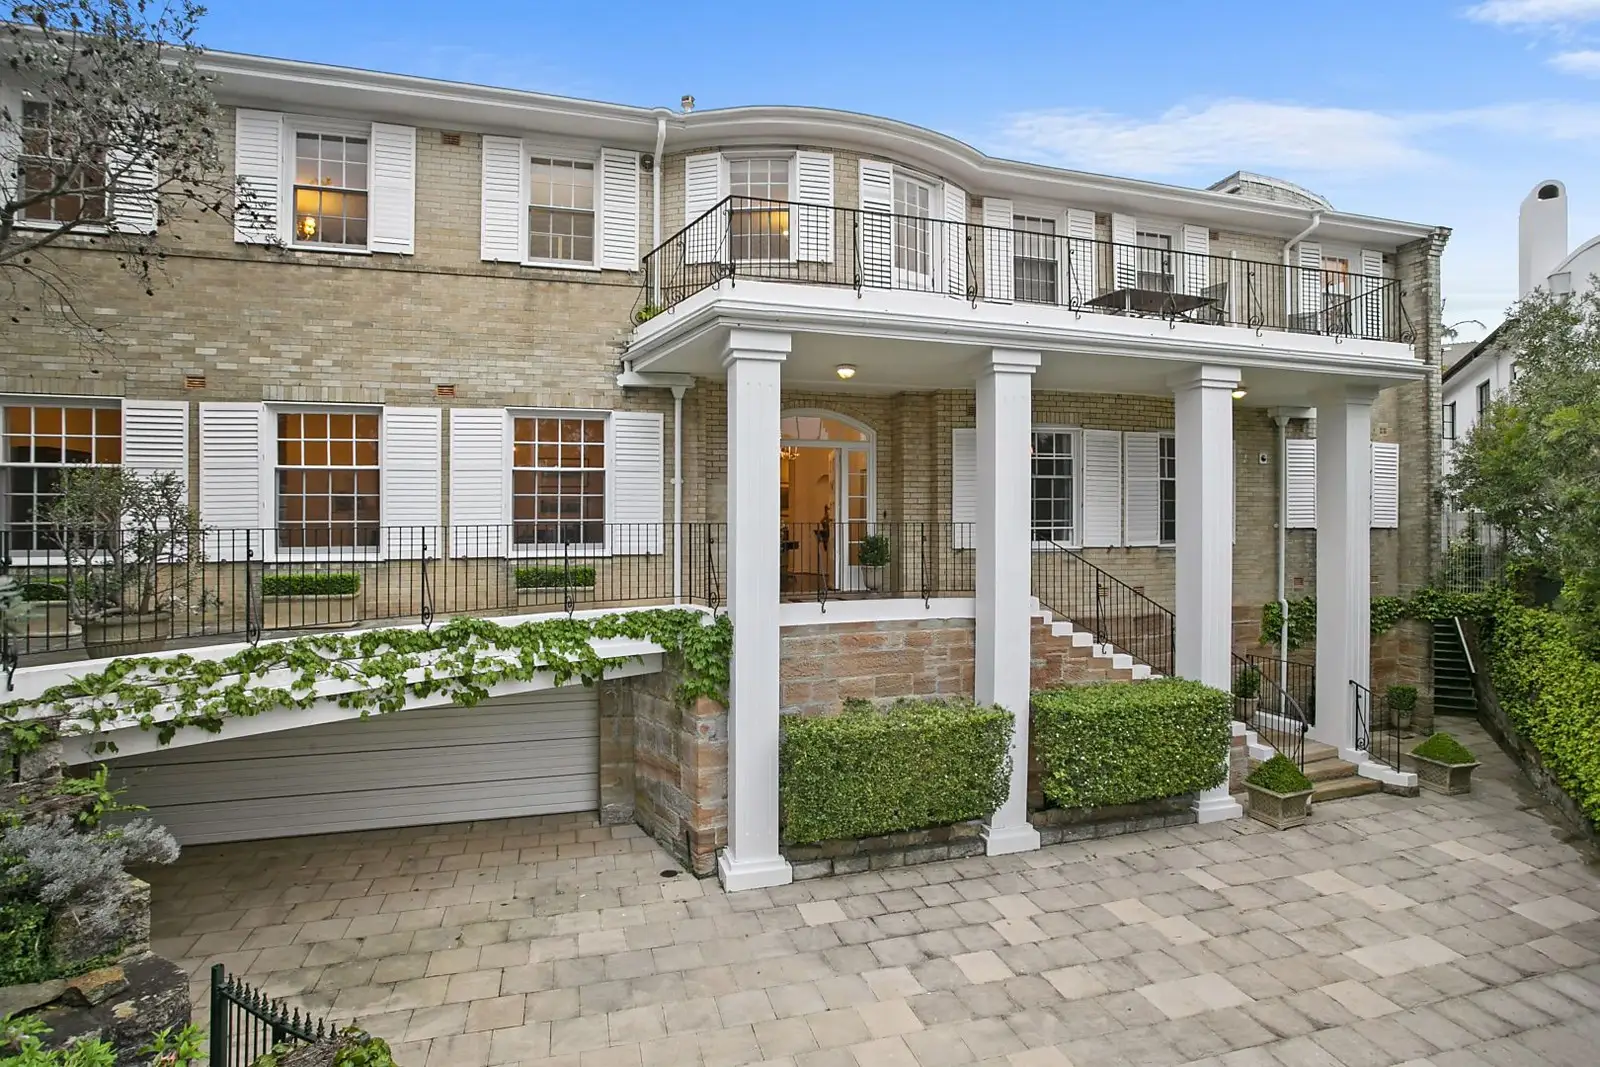 Photo #1: 25 Gilliver Avenue, Vaucluse - Sold by Sydney Sotheby's International Realty